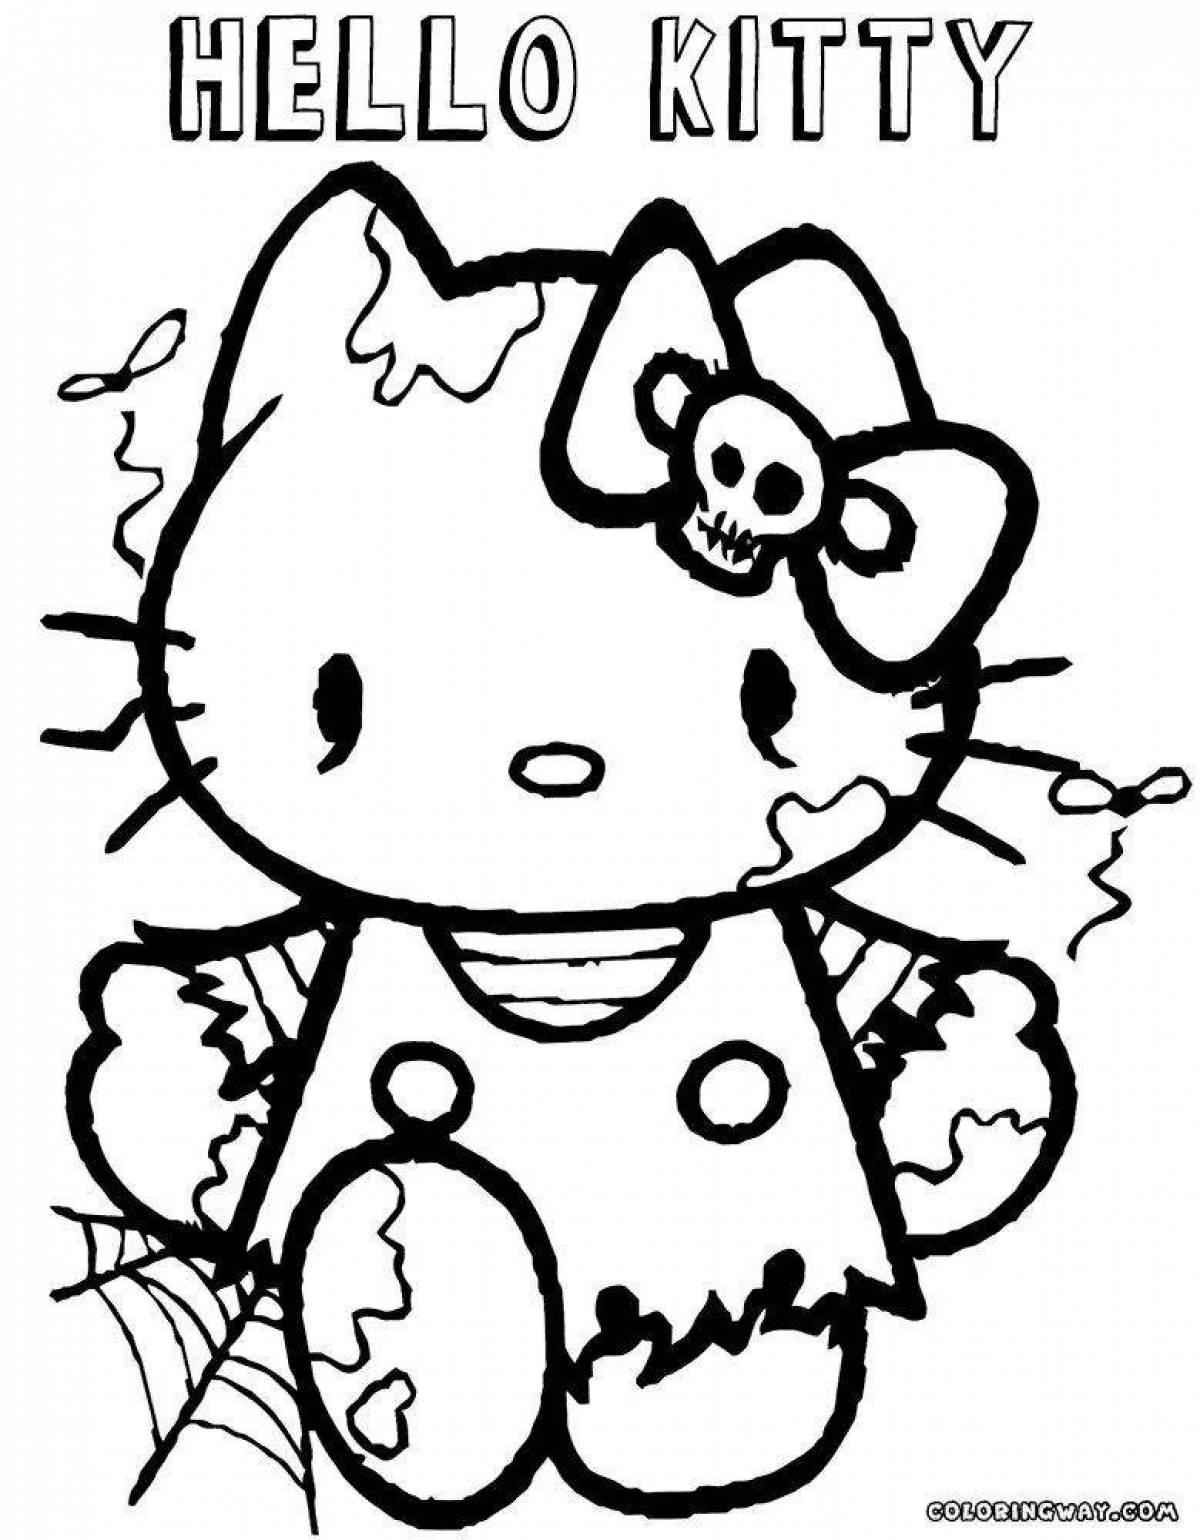 Sinister halloween kitty coloring book